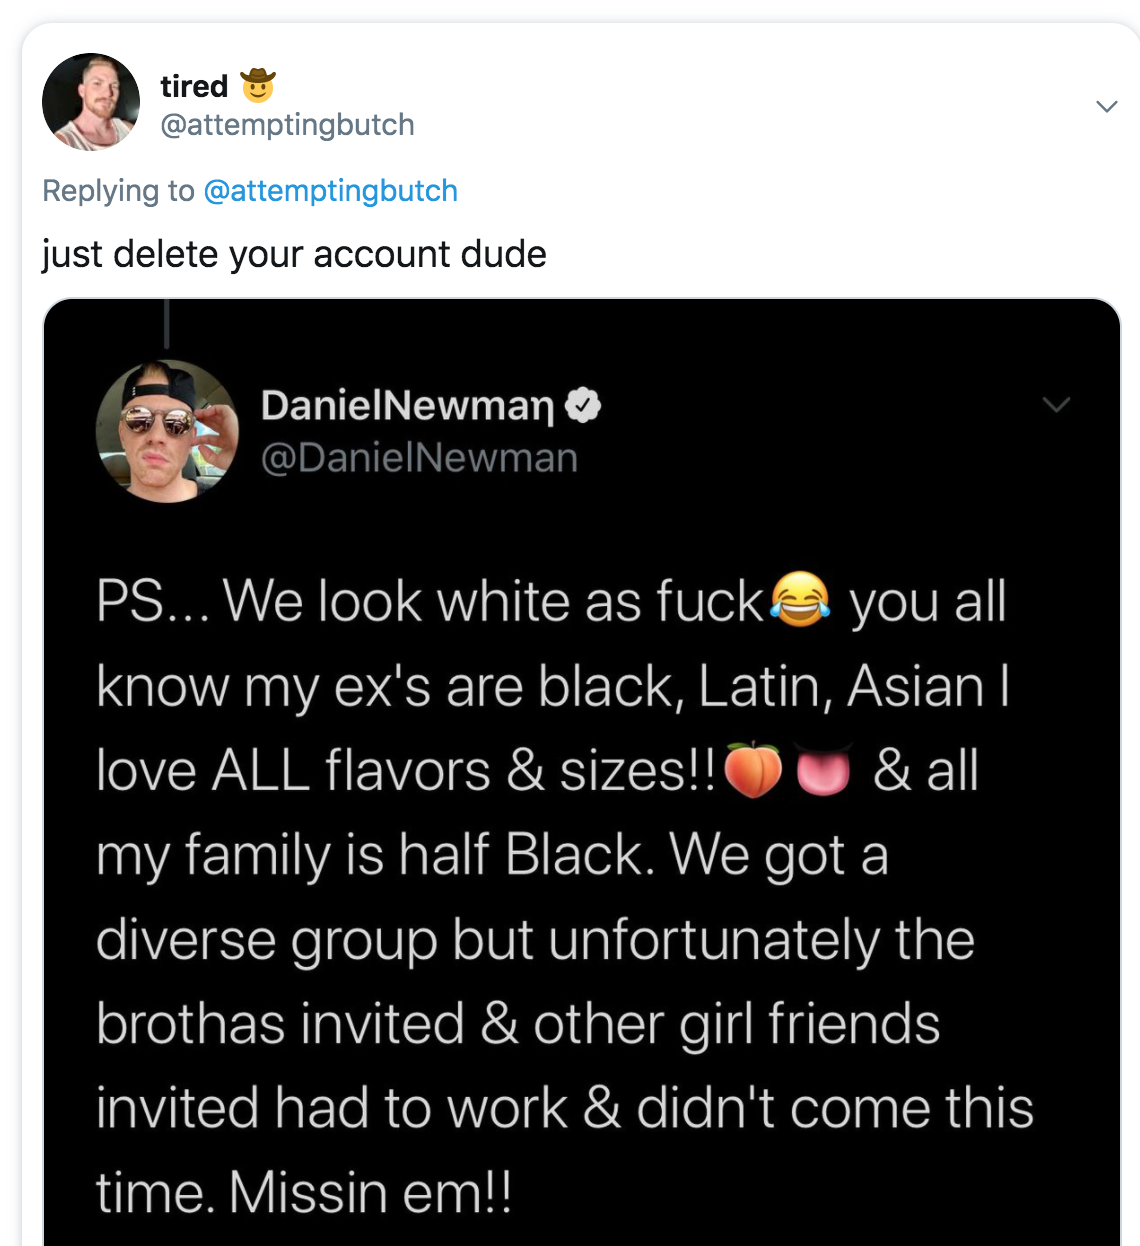 multimedia - tired just delete your account dude DanielNewman you all Ps... We look white as fuck know my ex's are black, Latin, Asian | love All flavors & sizes!! & all my family is half Black. We got a diverse group but unfortunately the brothas invited